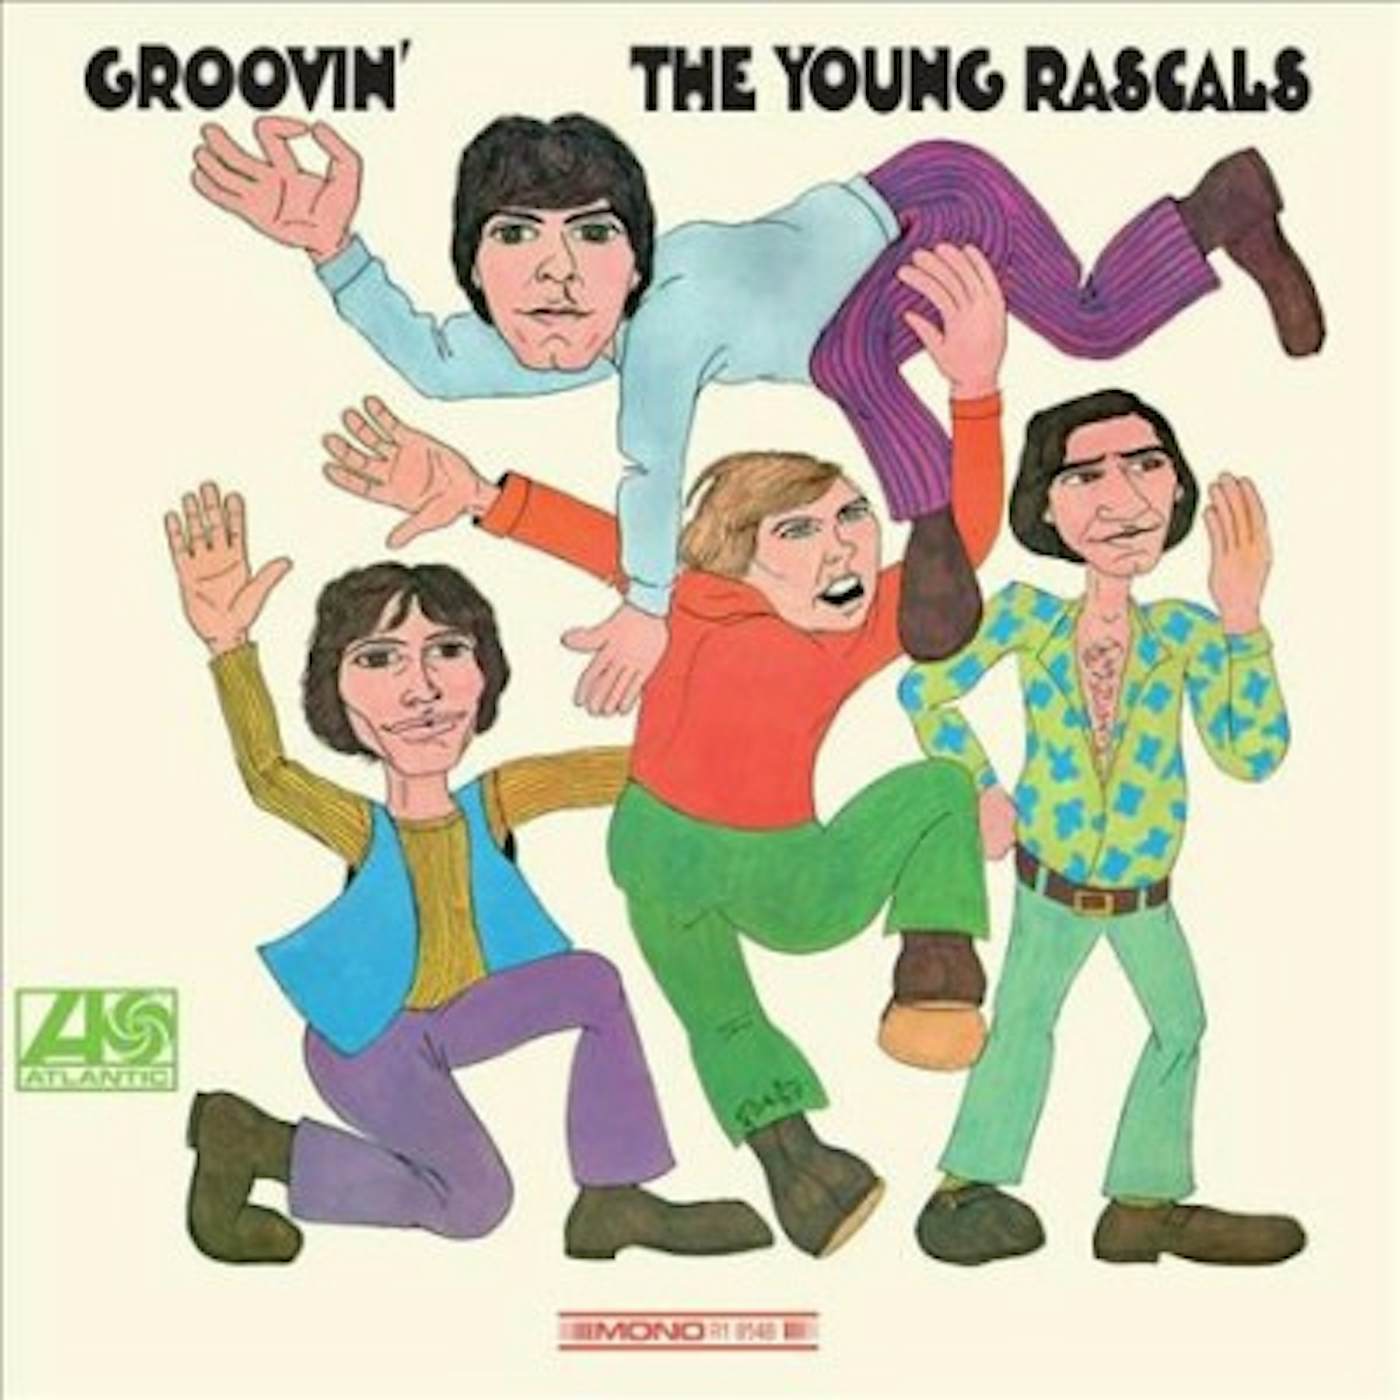 The Young Rascals Groovin' Vinyl Record